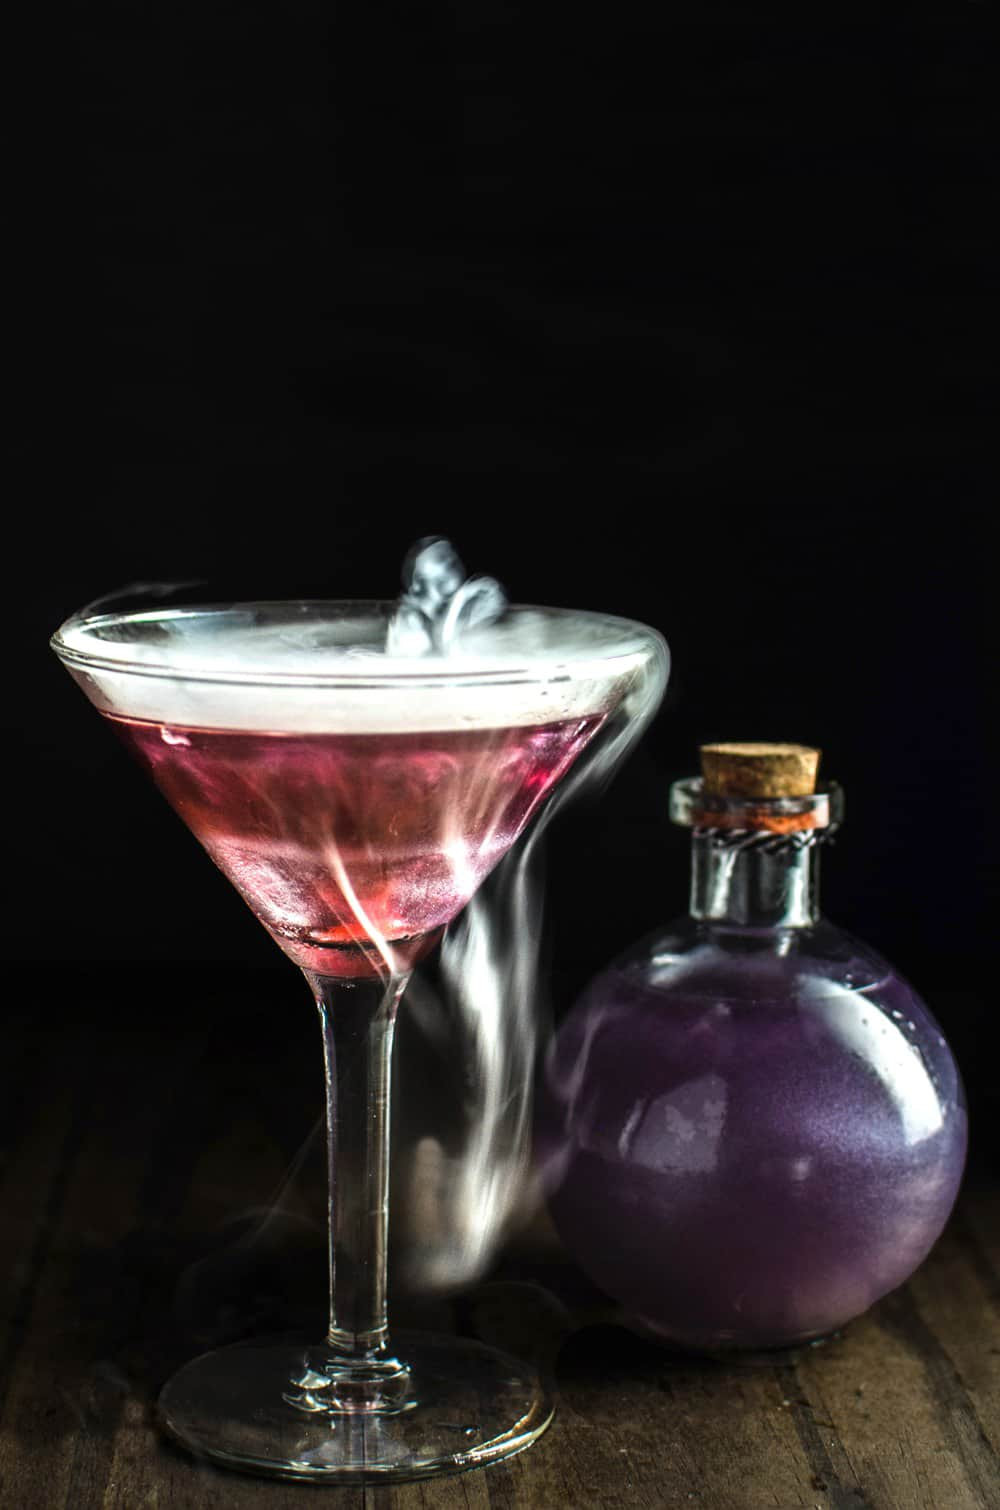 Alcoholic Halloween Drinks
 The Witch s Heart Halloween Cocktail